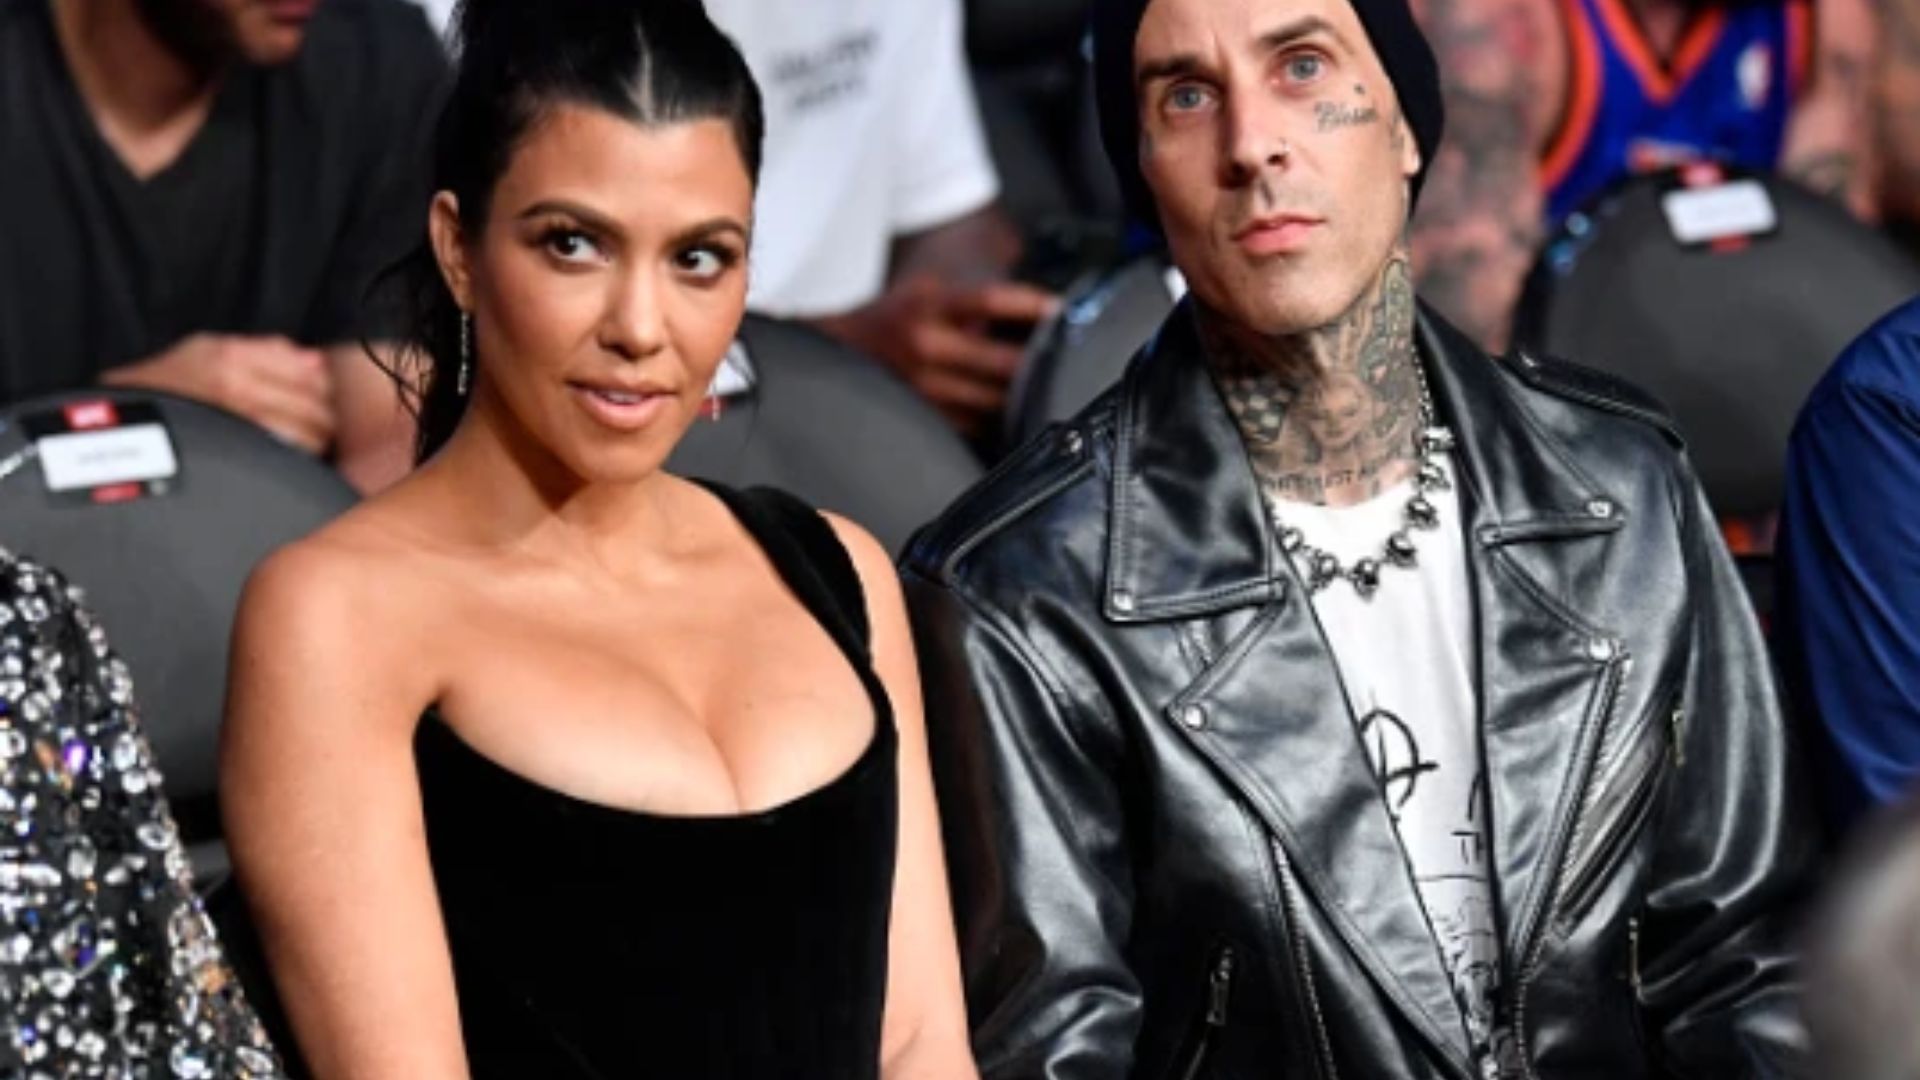 Travis Barker was taken to the medical clinic in a rescue vehicle